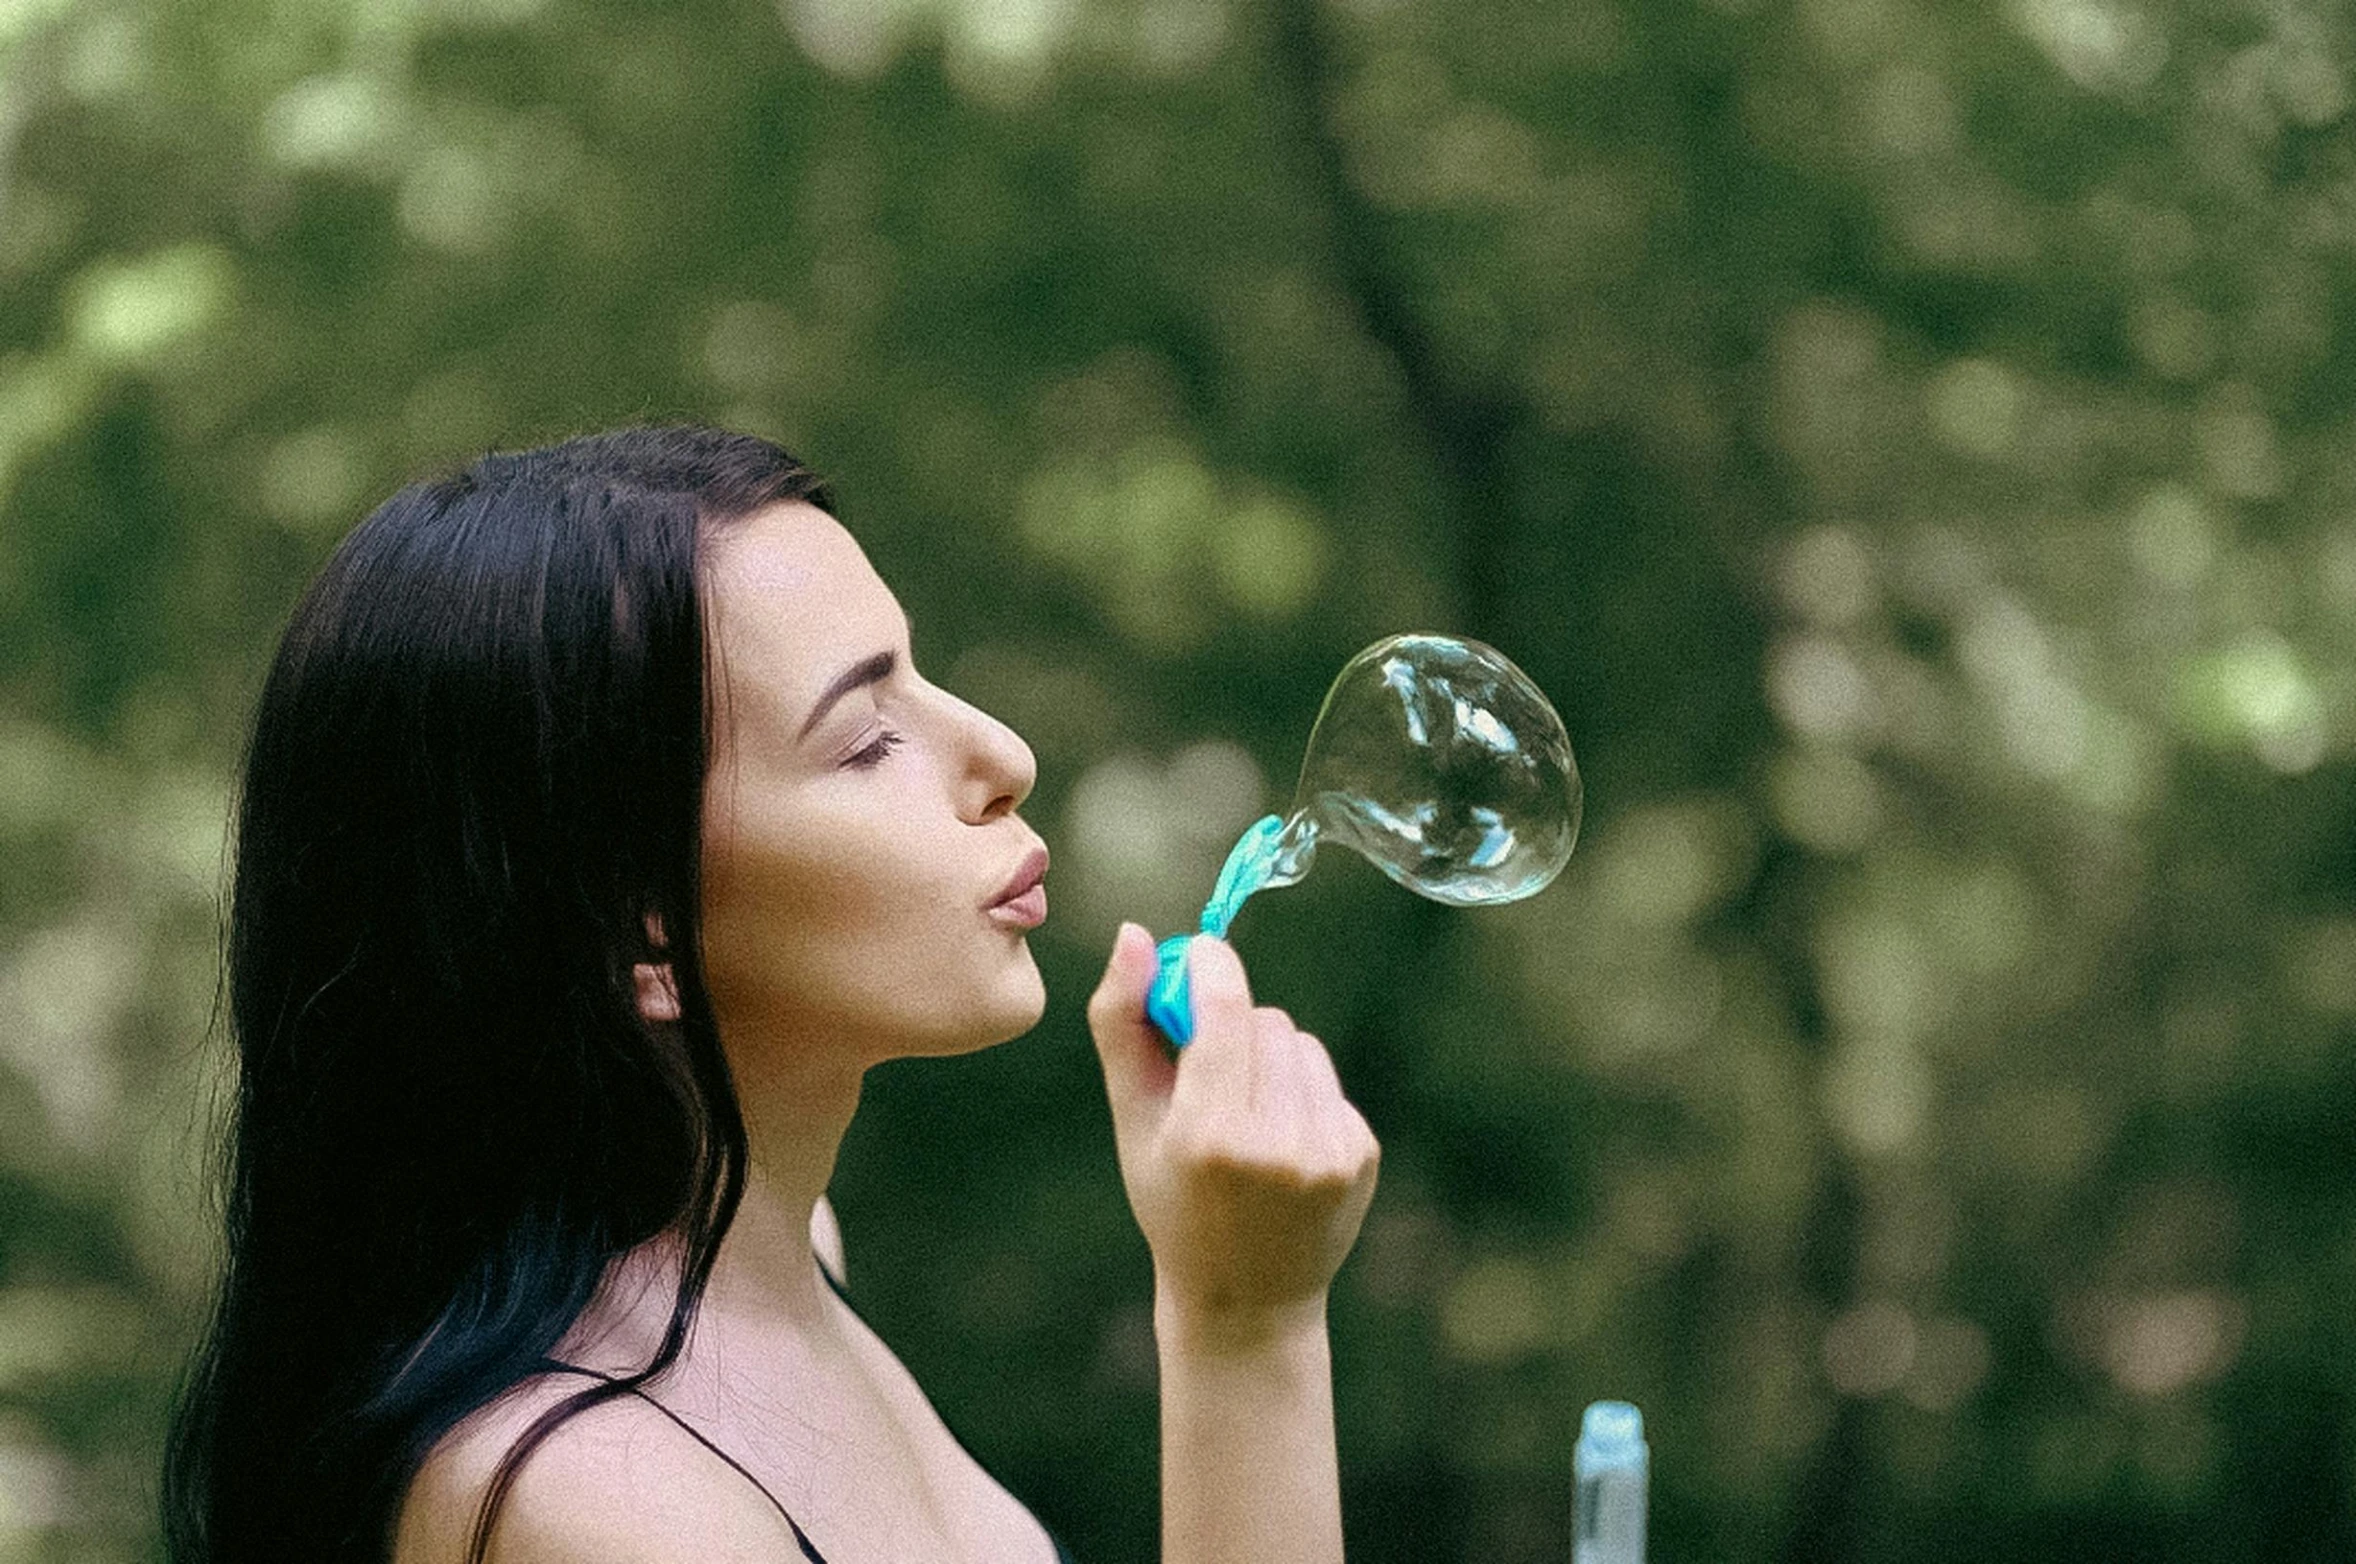 woman with blue and green hair blowing bubbles in front of trees